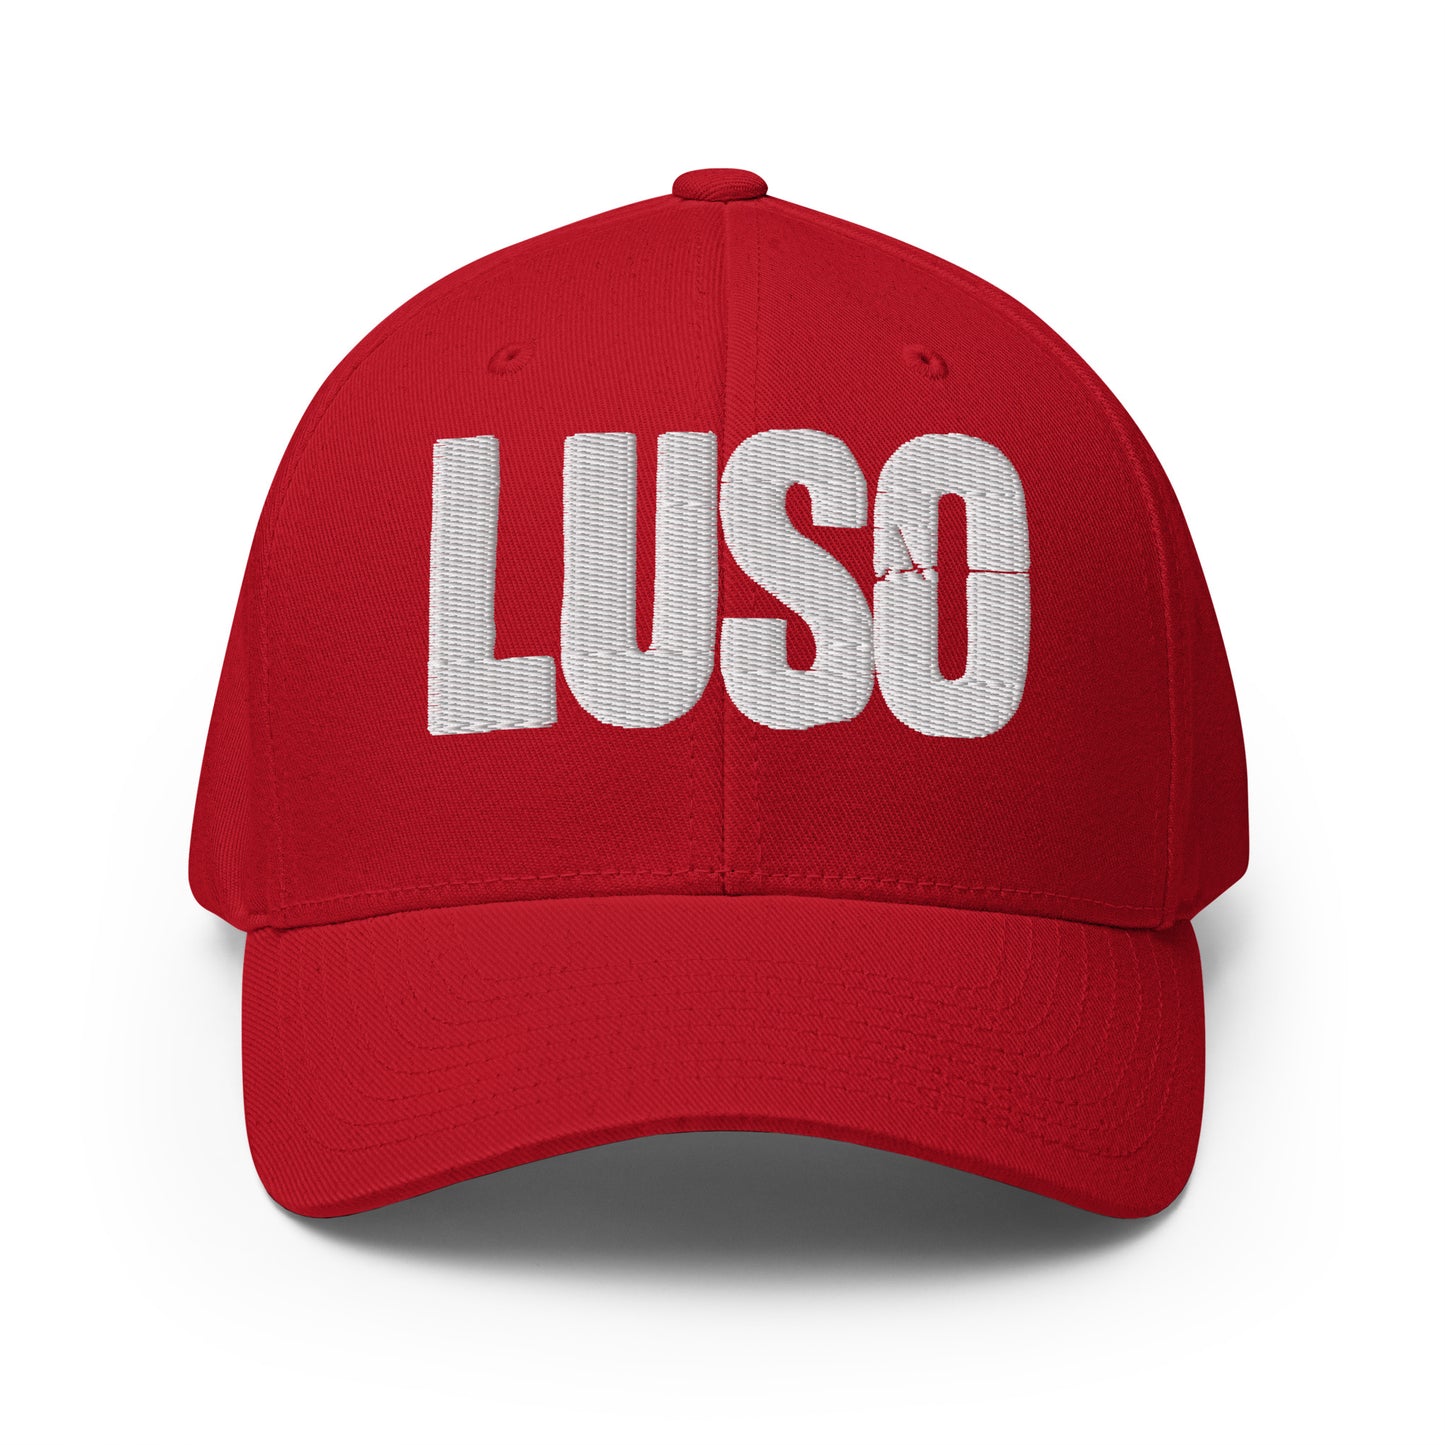 LUSO Puff Embroidered Structured Twill Cap